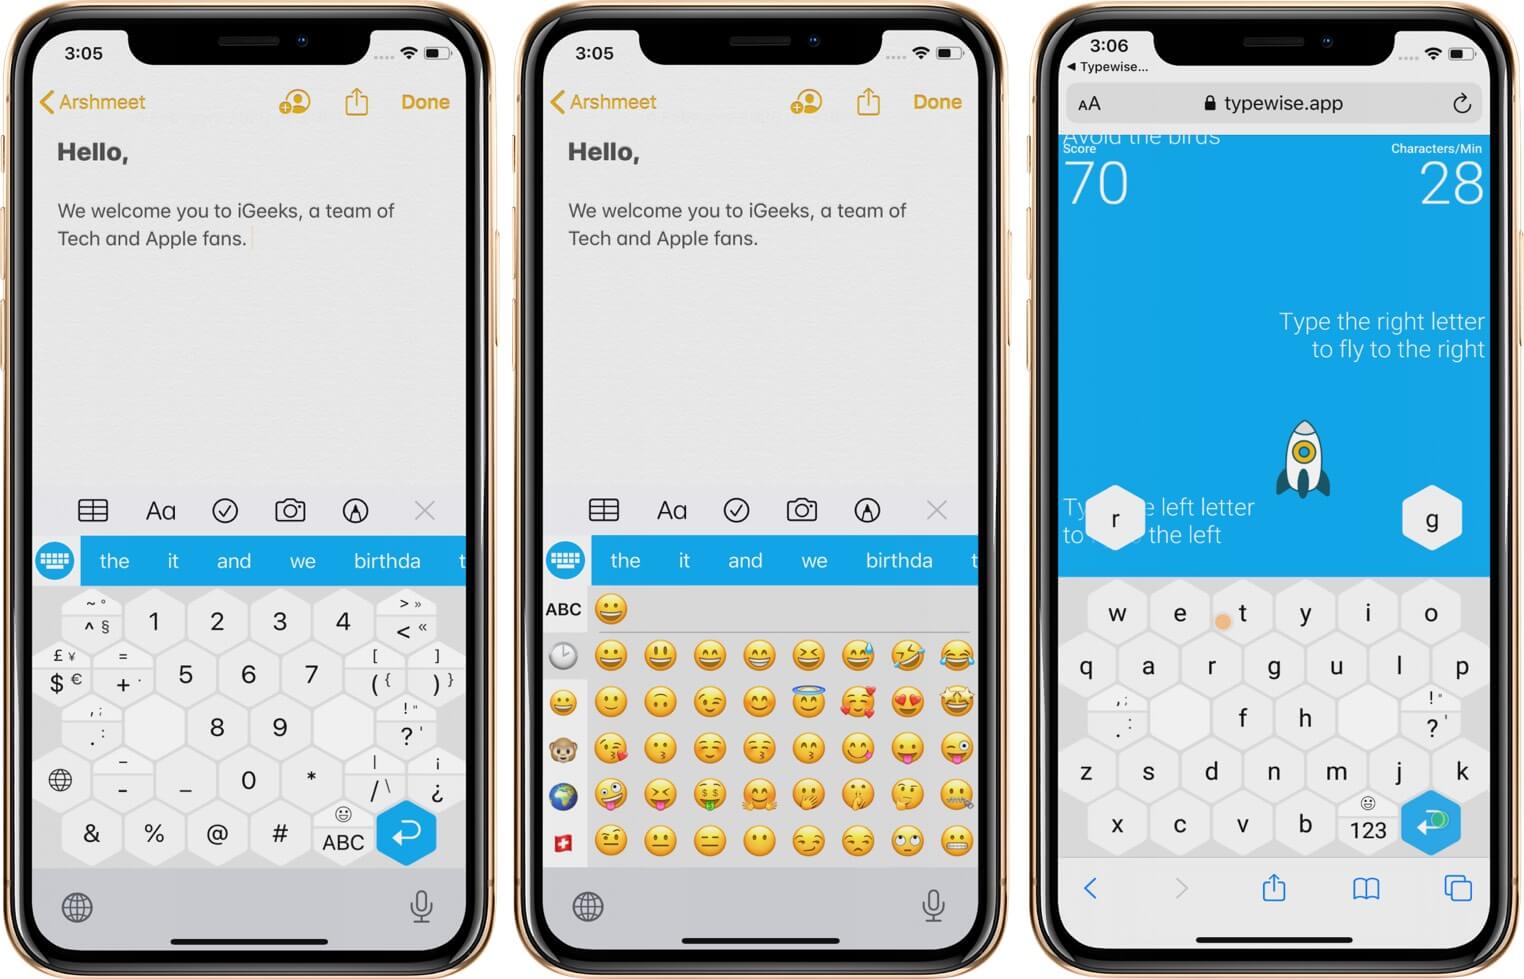 Use Different Keyboards in Typewise Keyboard App on iPhone